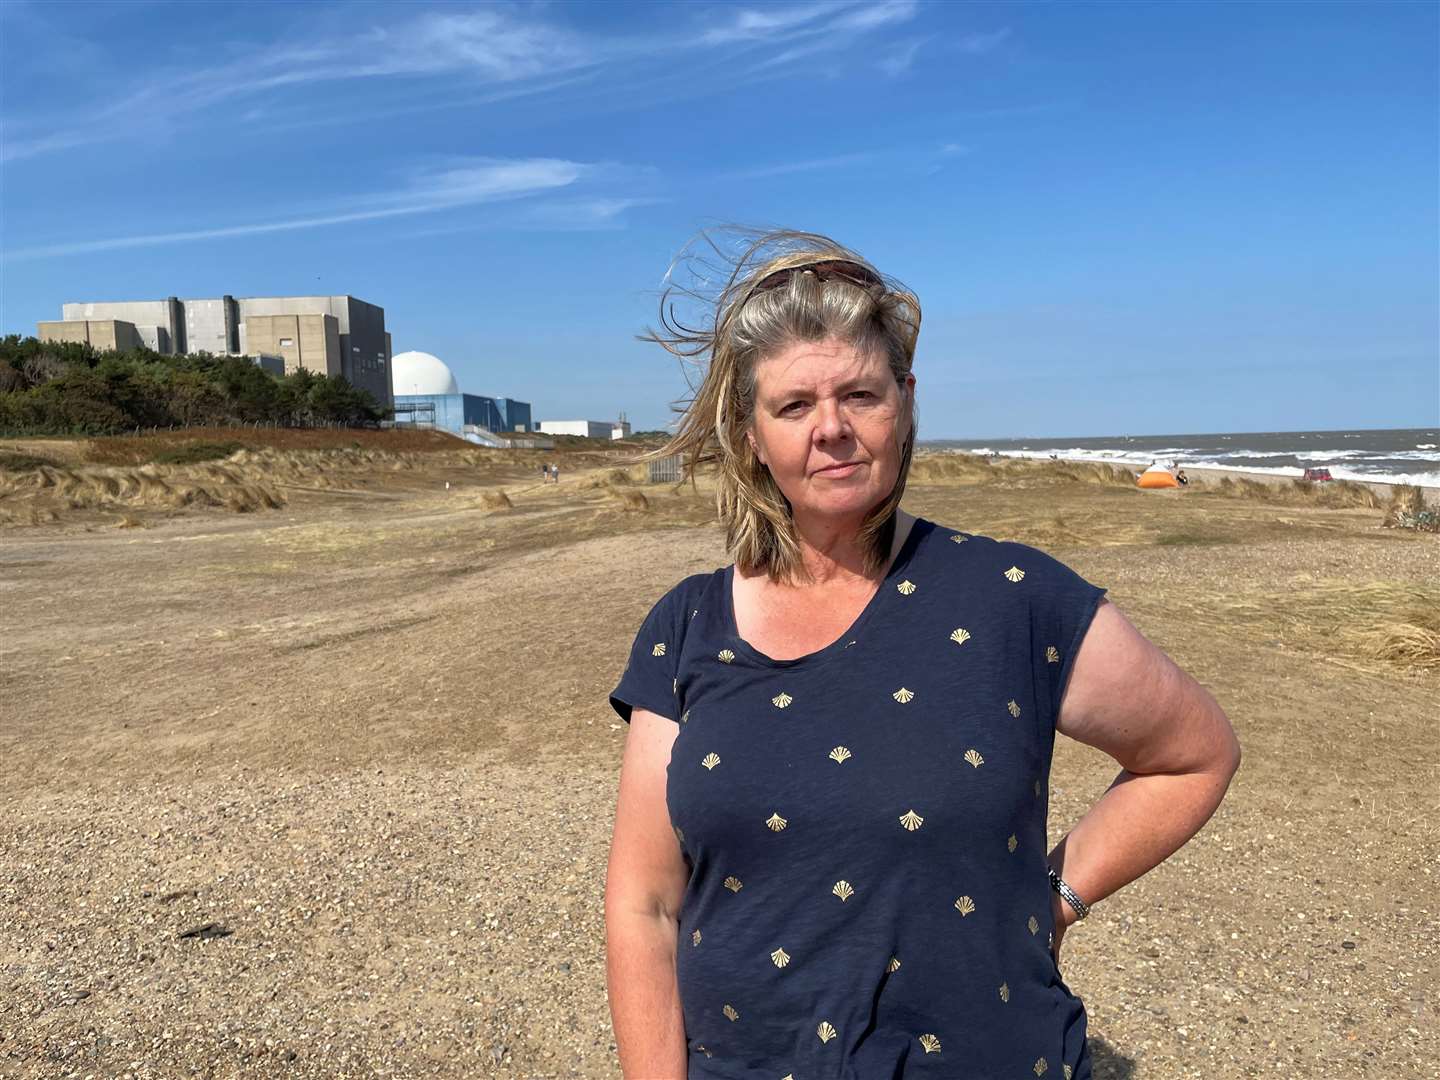 Alison Downes, of Stop Sizewell C, said Boris Johnson’s visit to the site ‘may turn out to be the kiss of death for Sizewell C’ (Sam Russell/ PA)